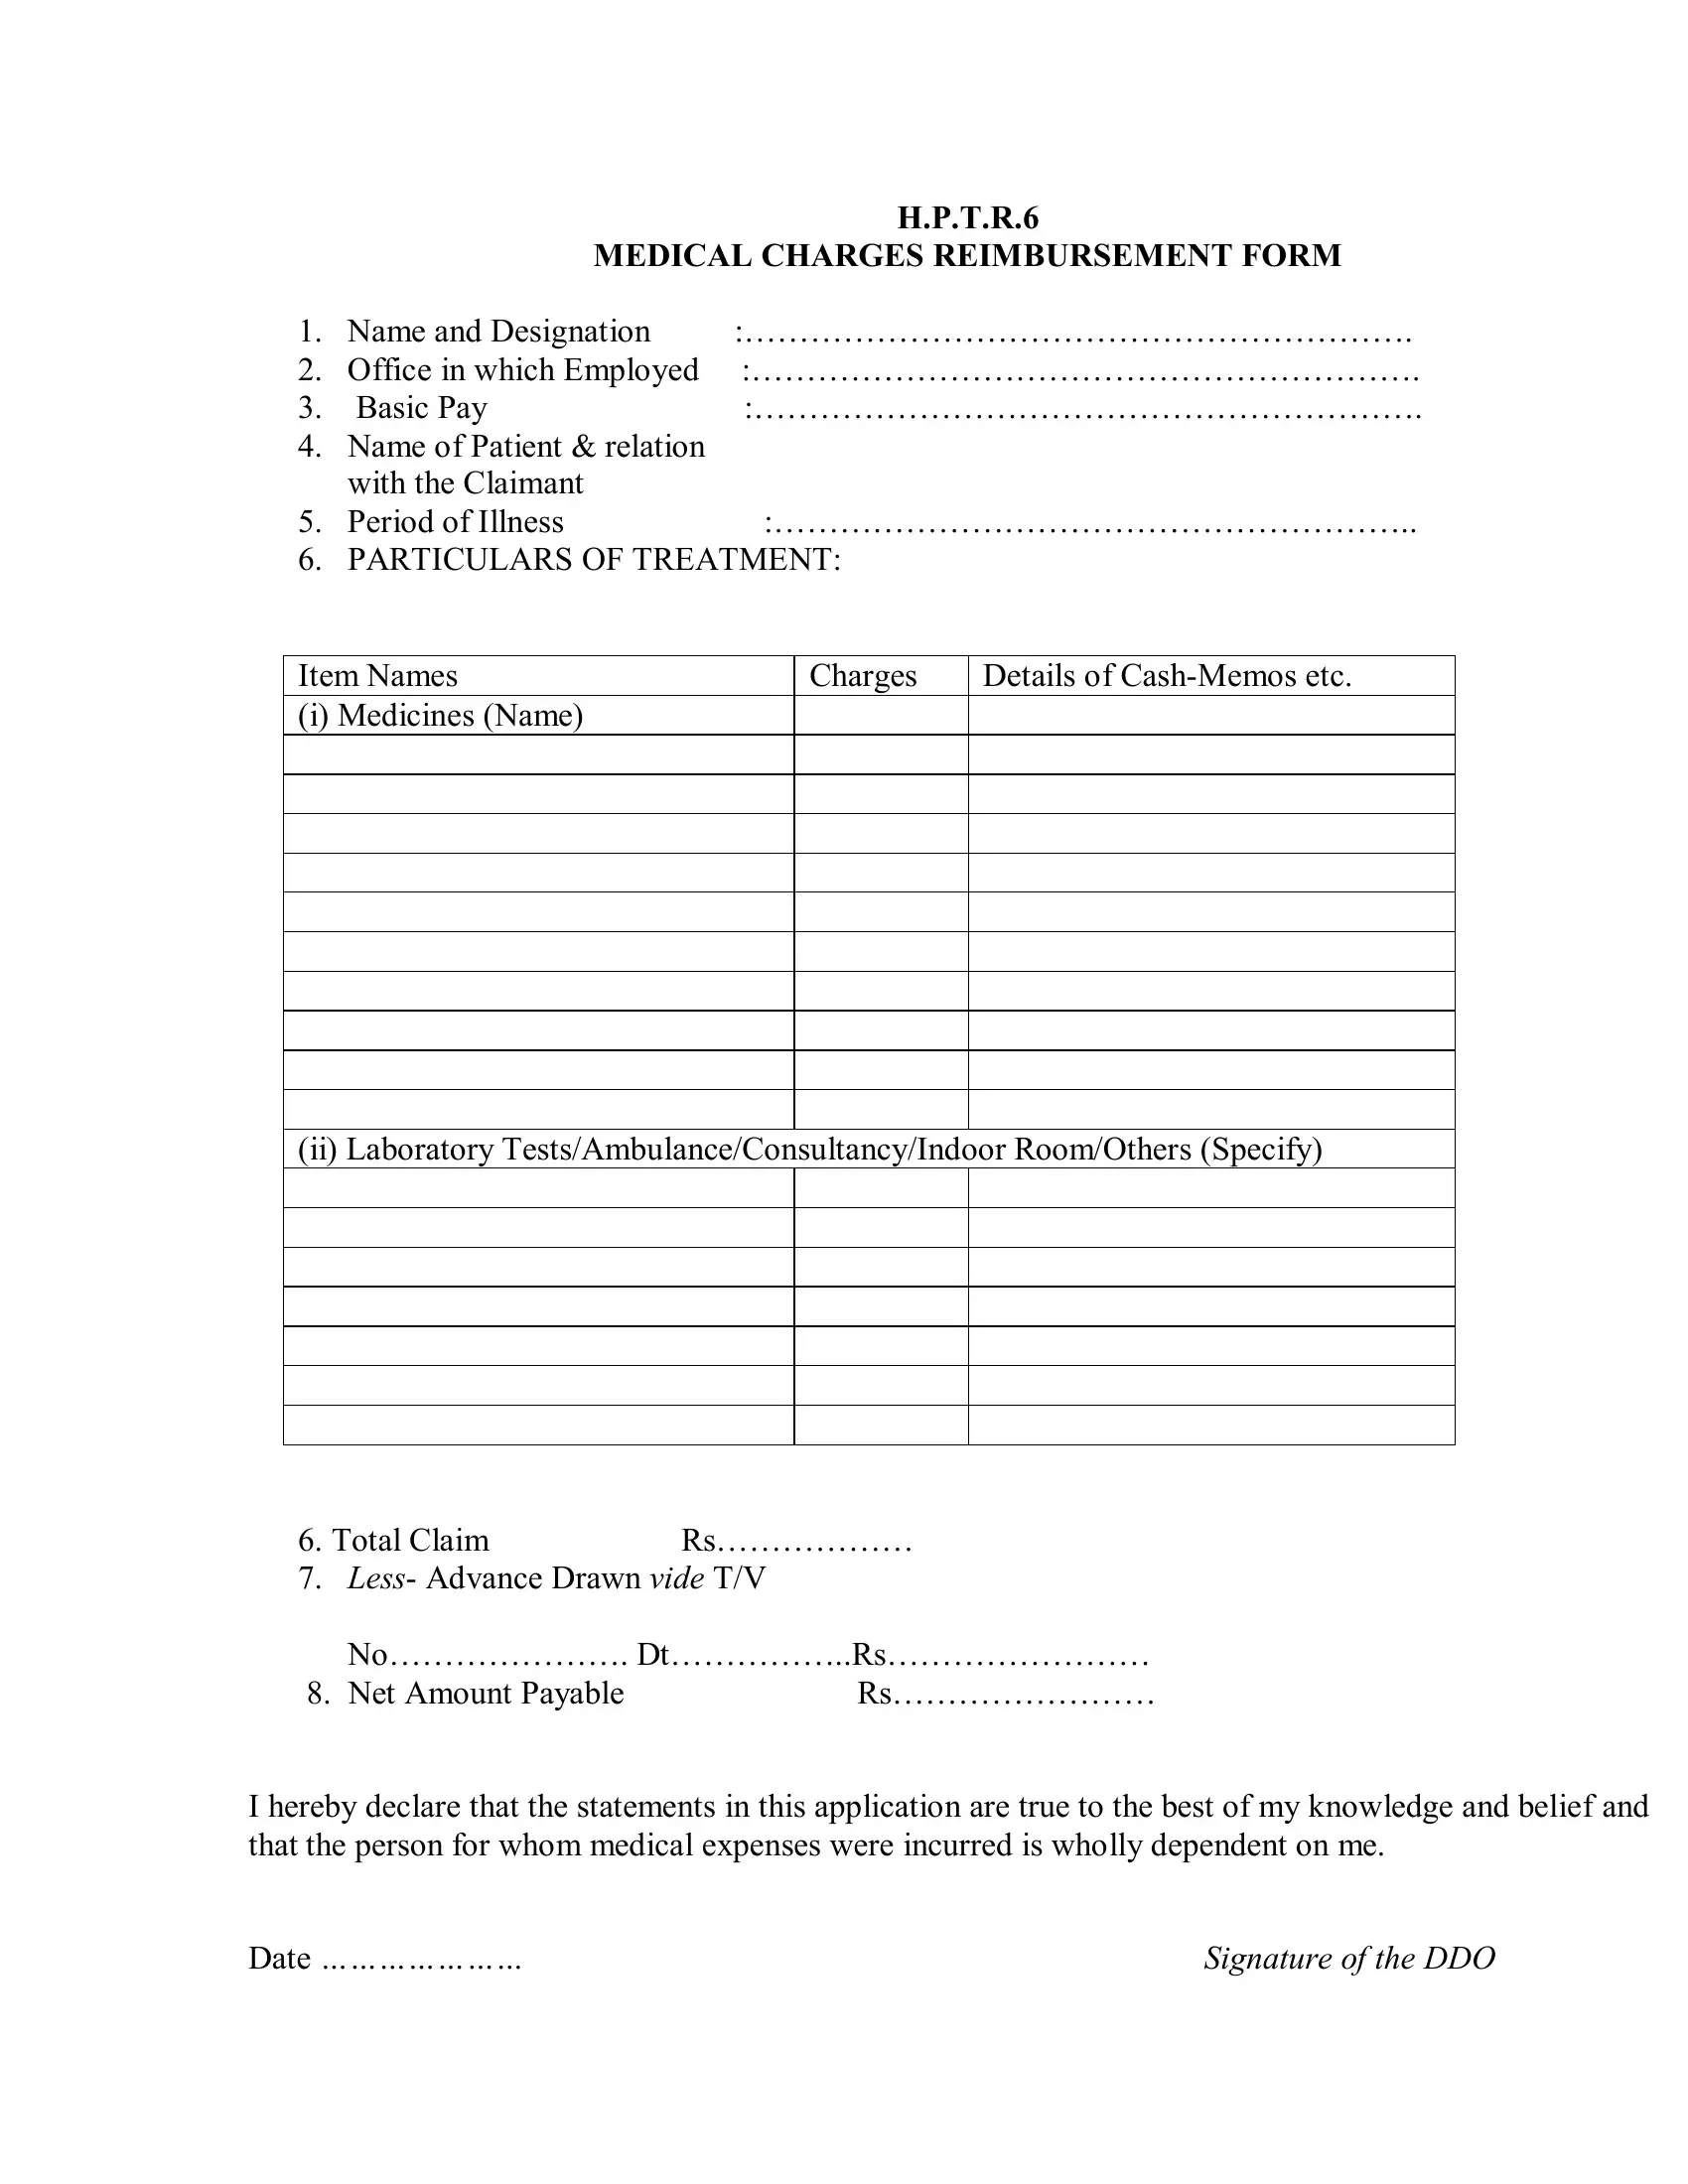 hptr-6-form-fill-out-printable-pdf-forms-online